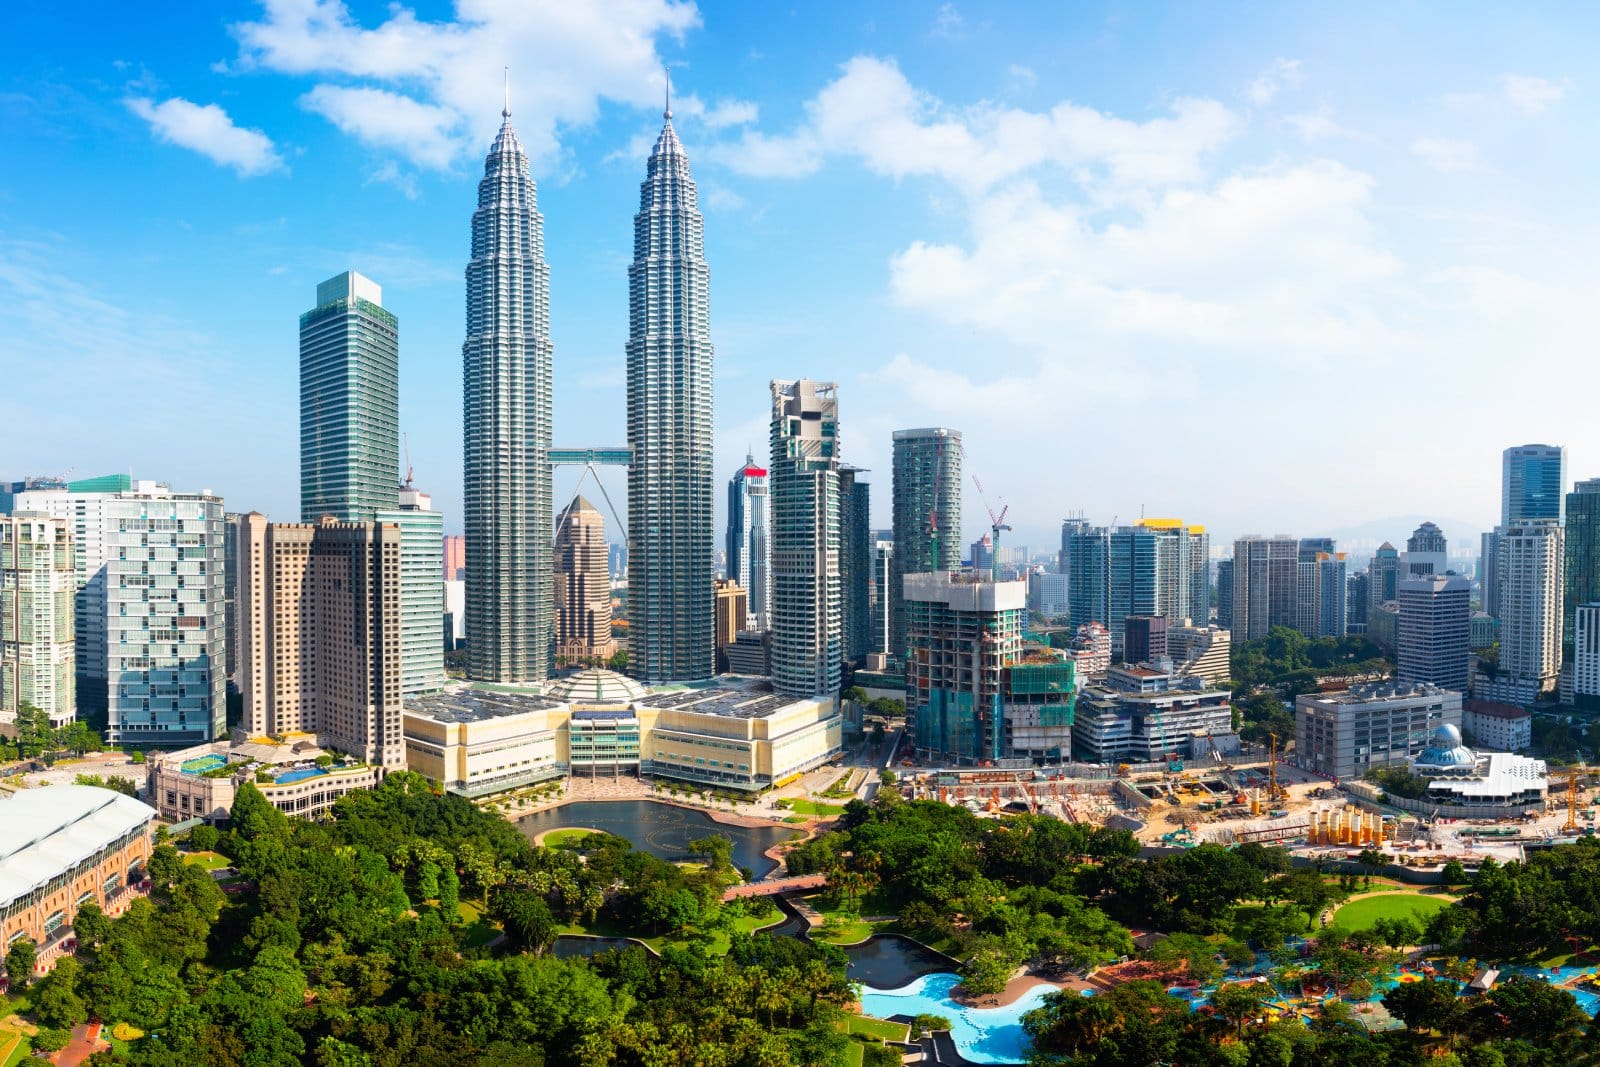 <p>A melting pot of cultures, Kuala Lumpur offers an urban experience with all the nomad essentials: fast internet, low living costs, and a food scene to die for.</p>